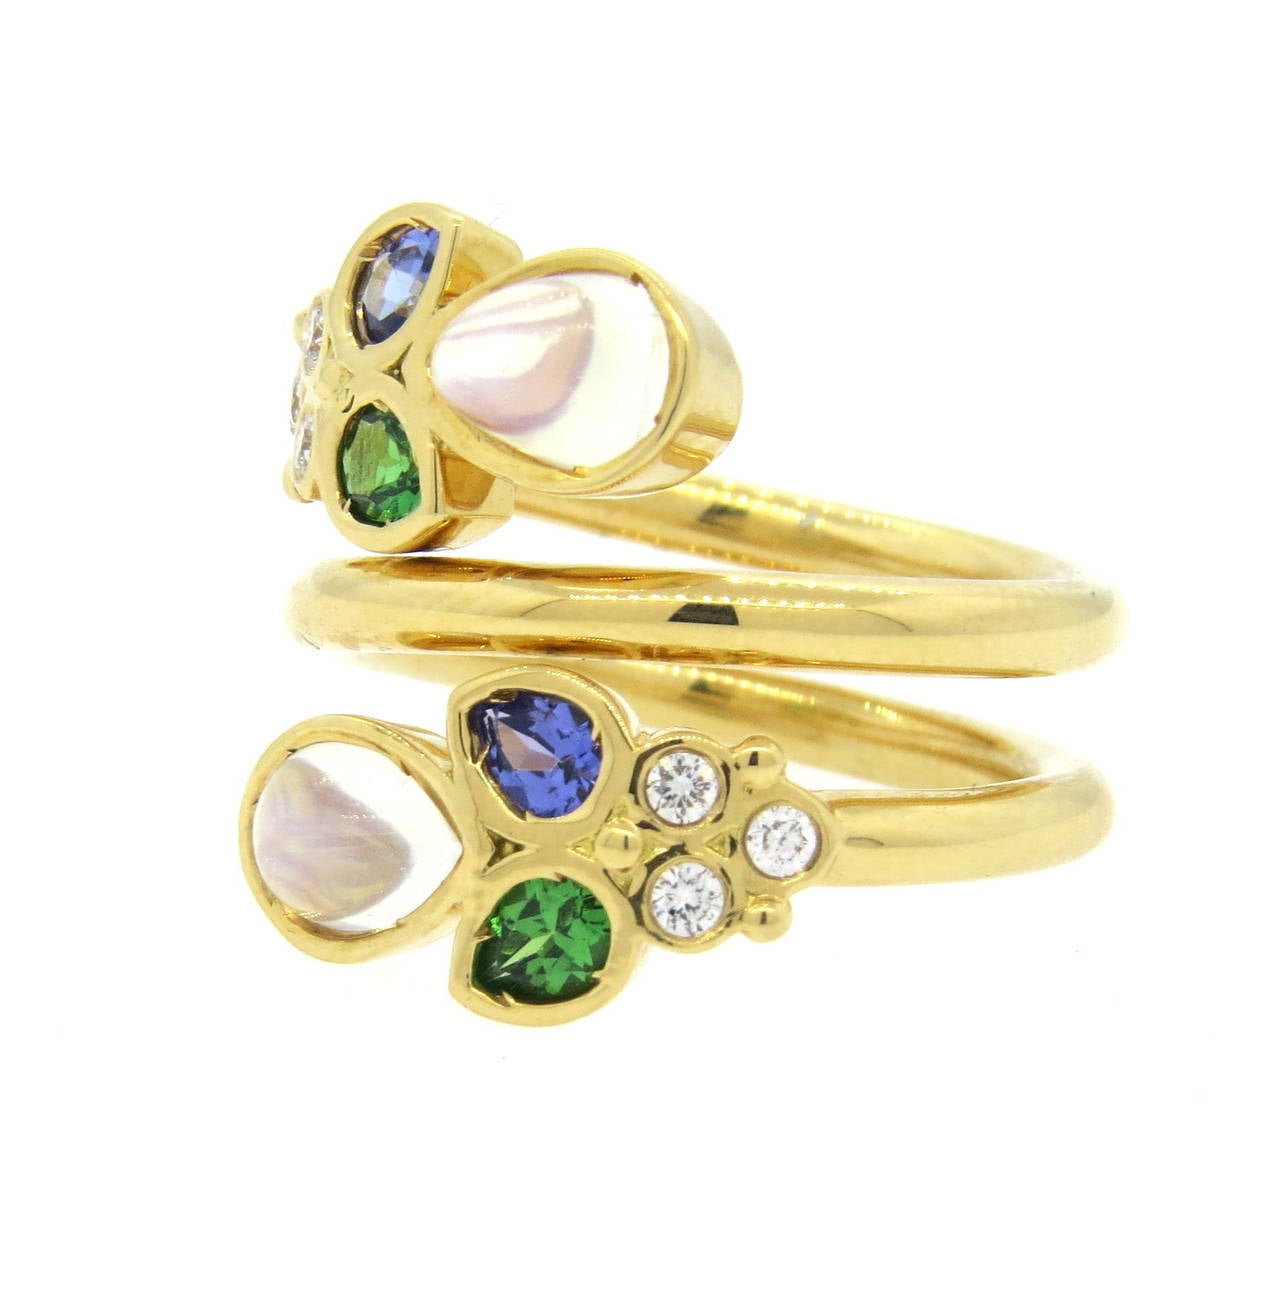 Temple St. Clair 18k gold wrap ring from Anima collection, featuring 0.15ctw in G/VS diamonds, moonstones, tsavorites and tanzanite gemstones. Ring size 7 1/4, ring is 21mm wide. Marked 750 and with Temple hallmark. Weight of the piece - 13 grams